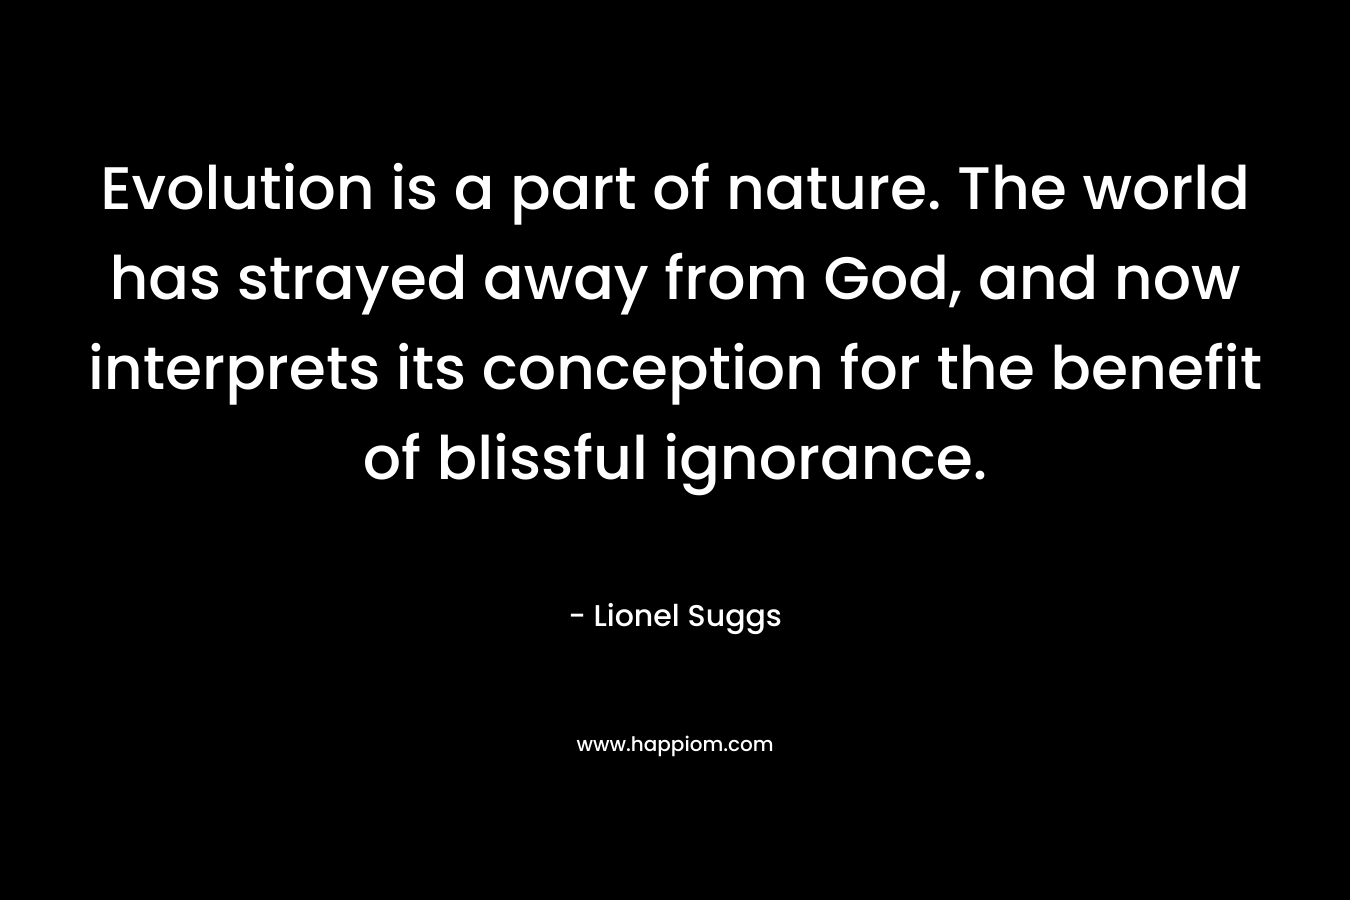 Evolution is a part of nature. The world has strayed away from God, and now interprets its conception for the benefit of blissful ignorance. – Lionel Suggs